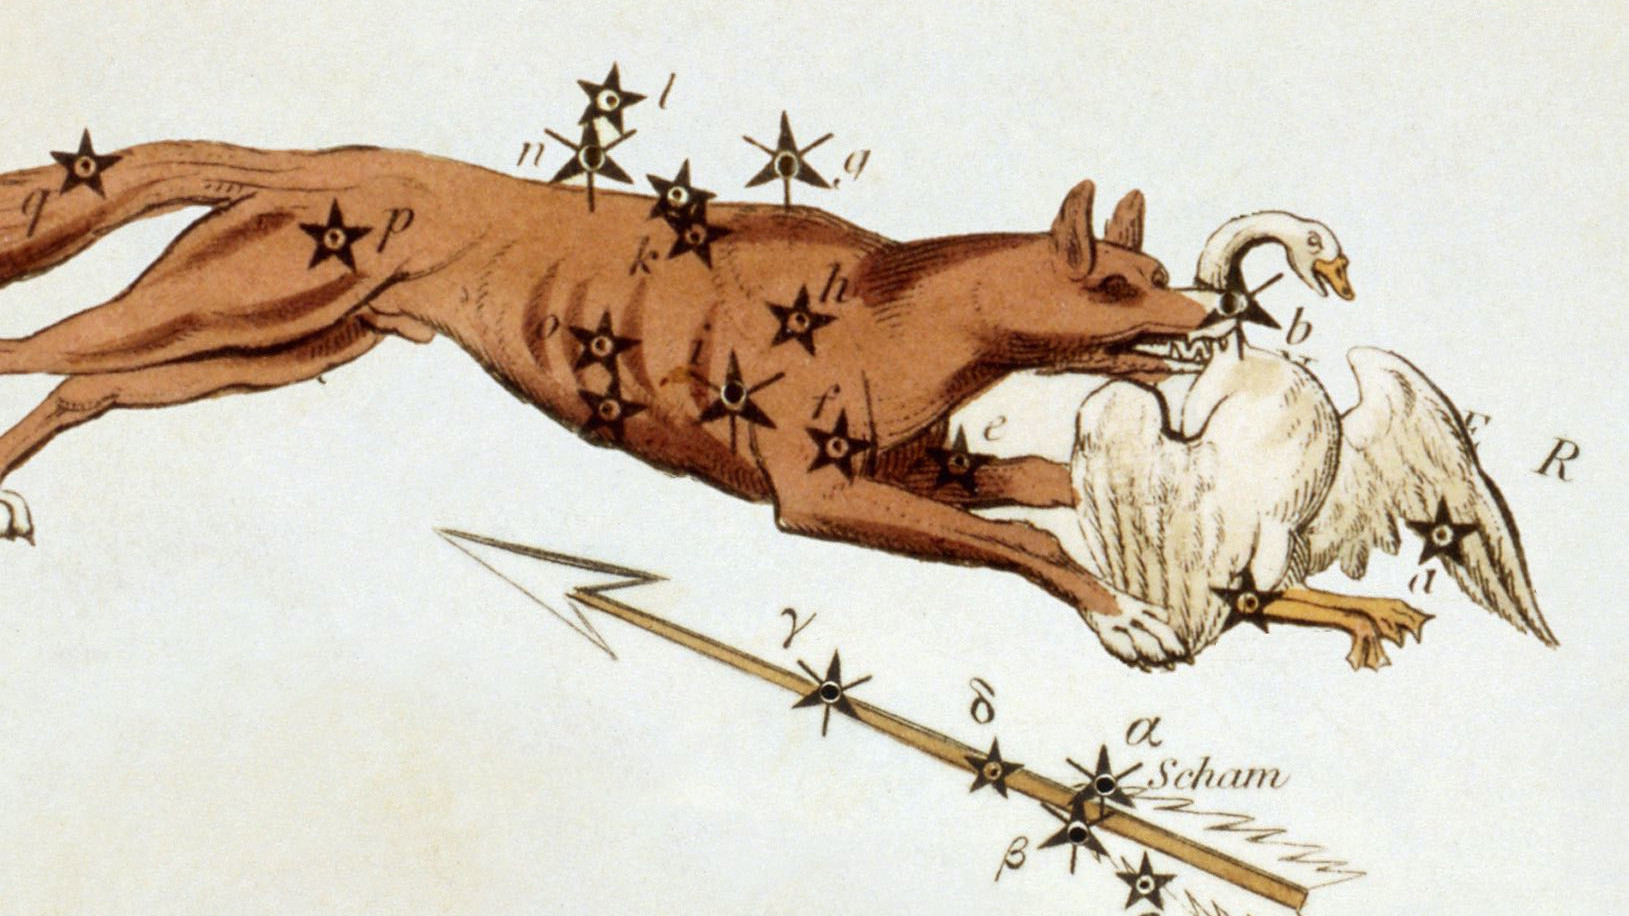 Half-way between Cygnus and Aquila is the Sagitta and Vulpecula pair of constellations; the latter is depicted on historical star charts with a goose.